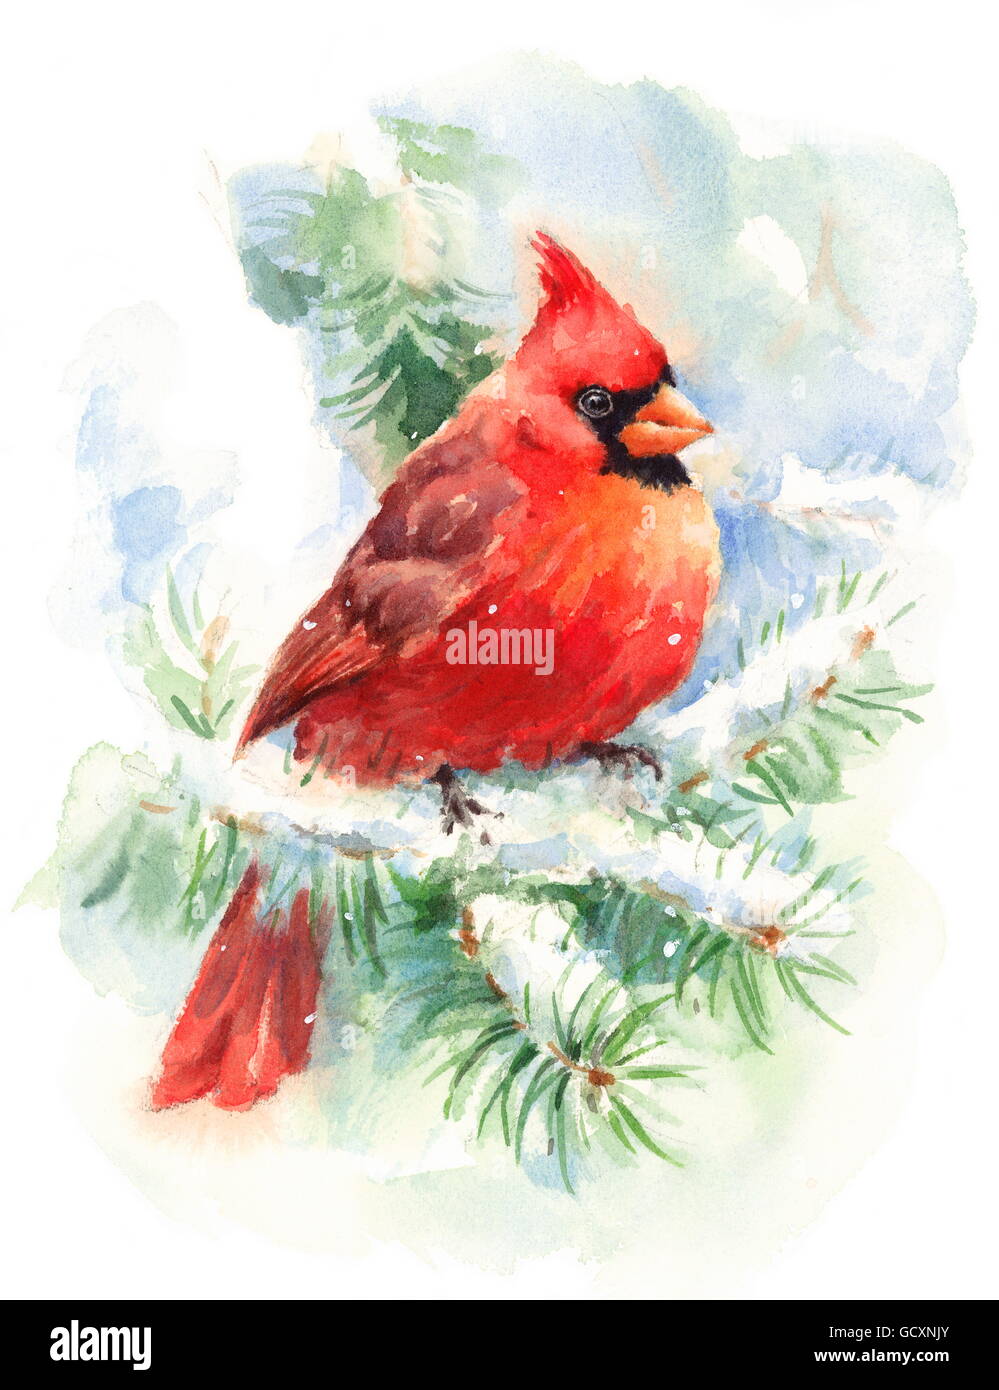 Watercolor Bird Red Cardinal Hand Painted Christmas Holiday Winter Stock Photo Alamy